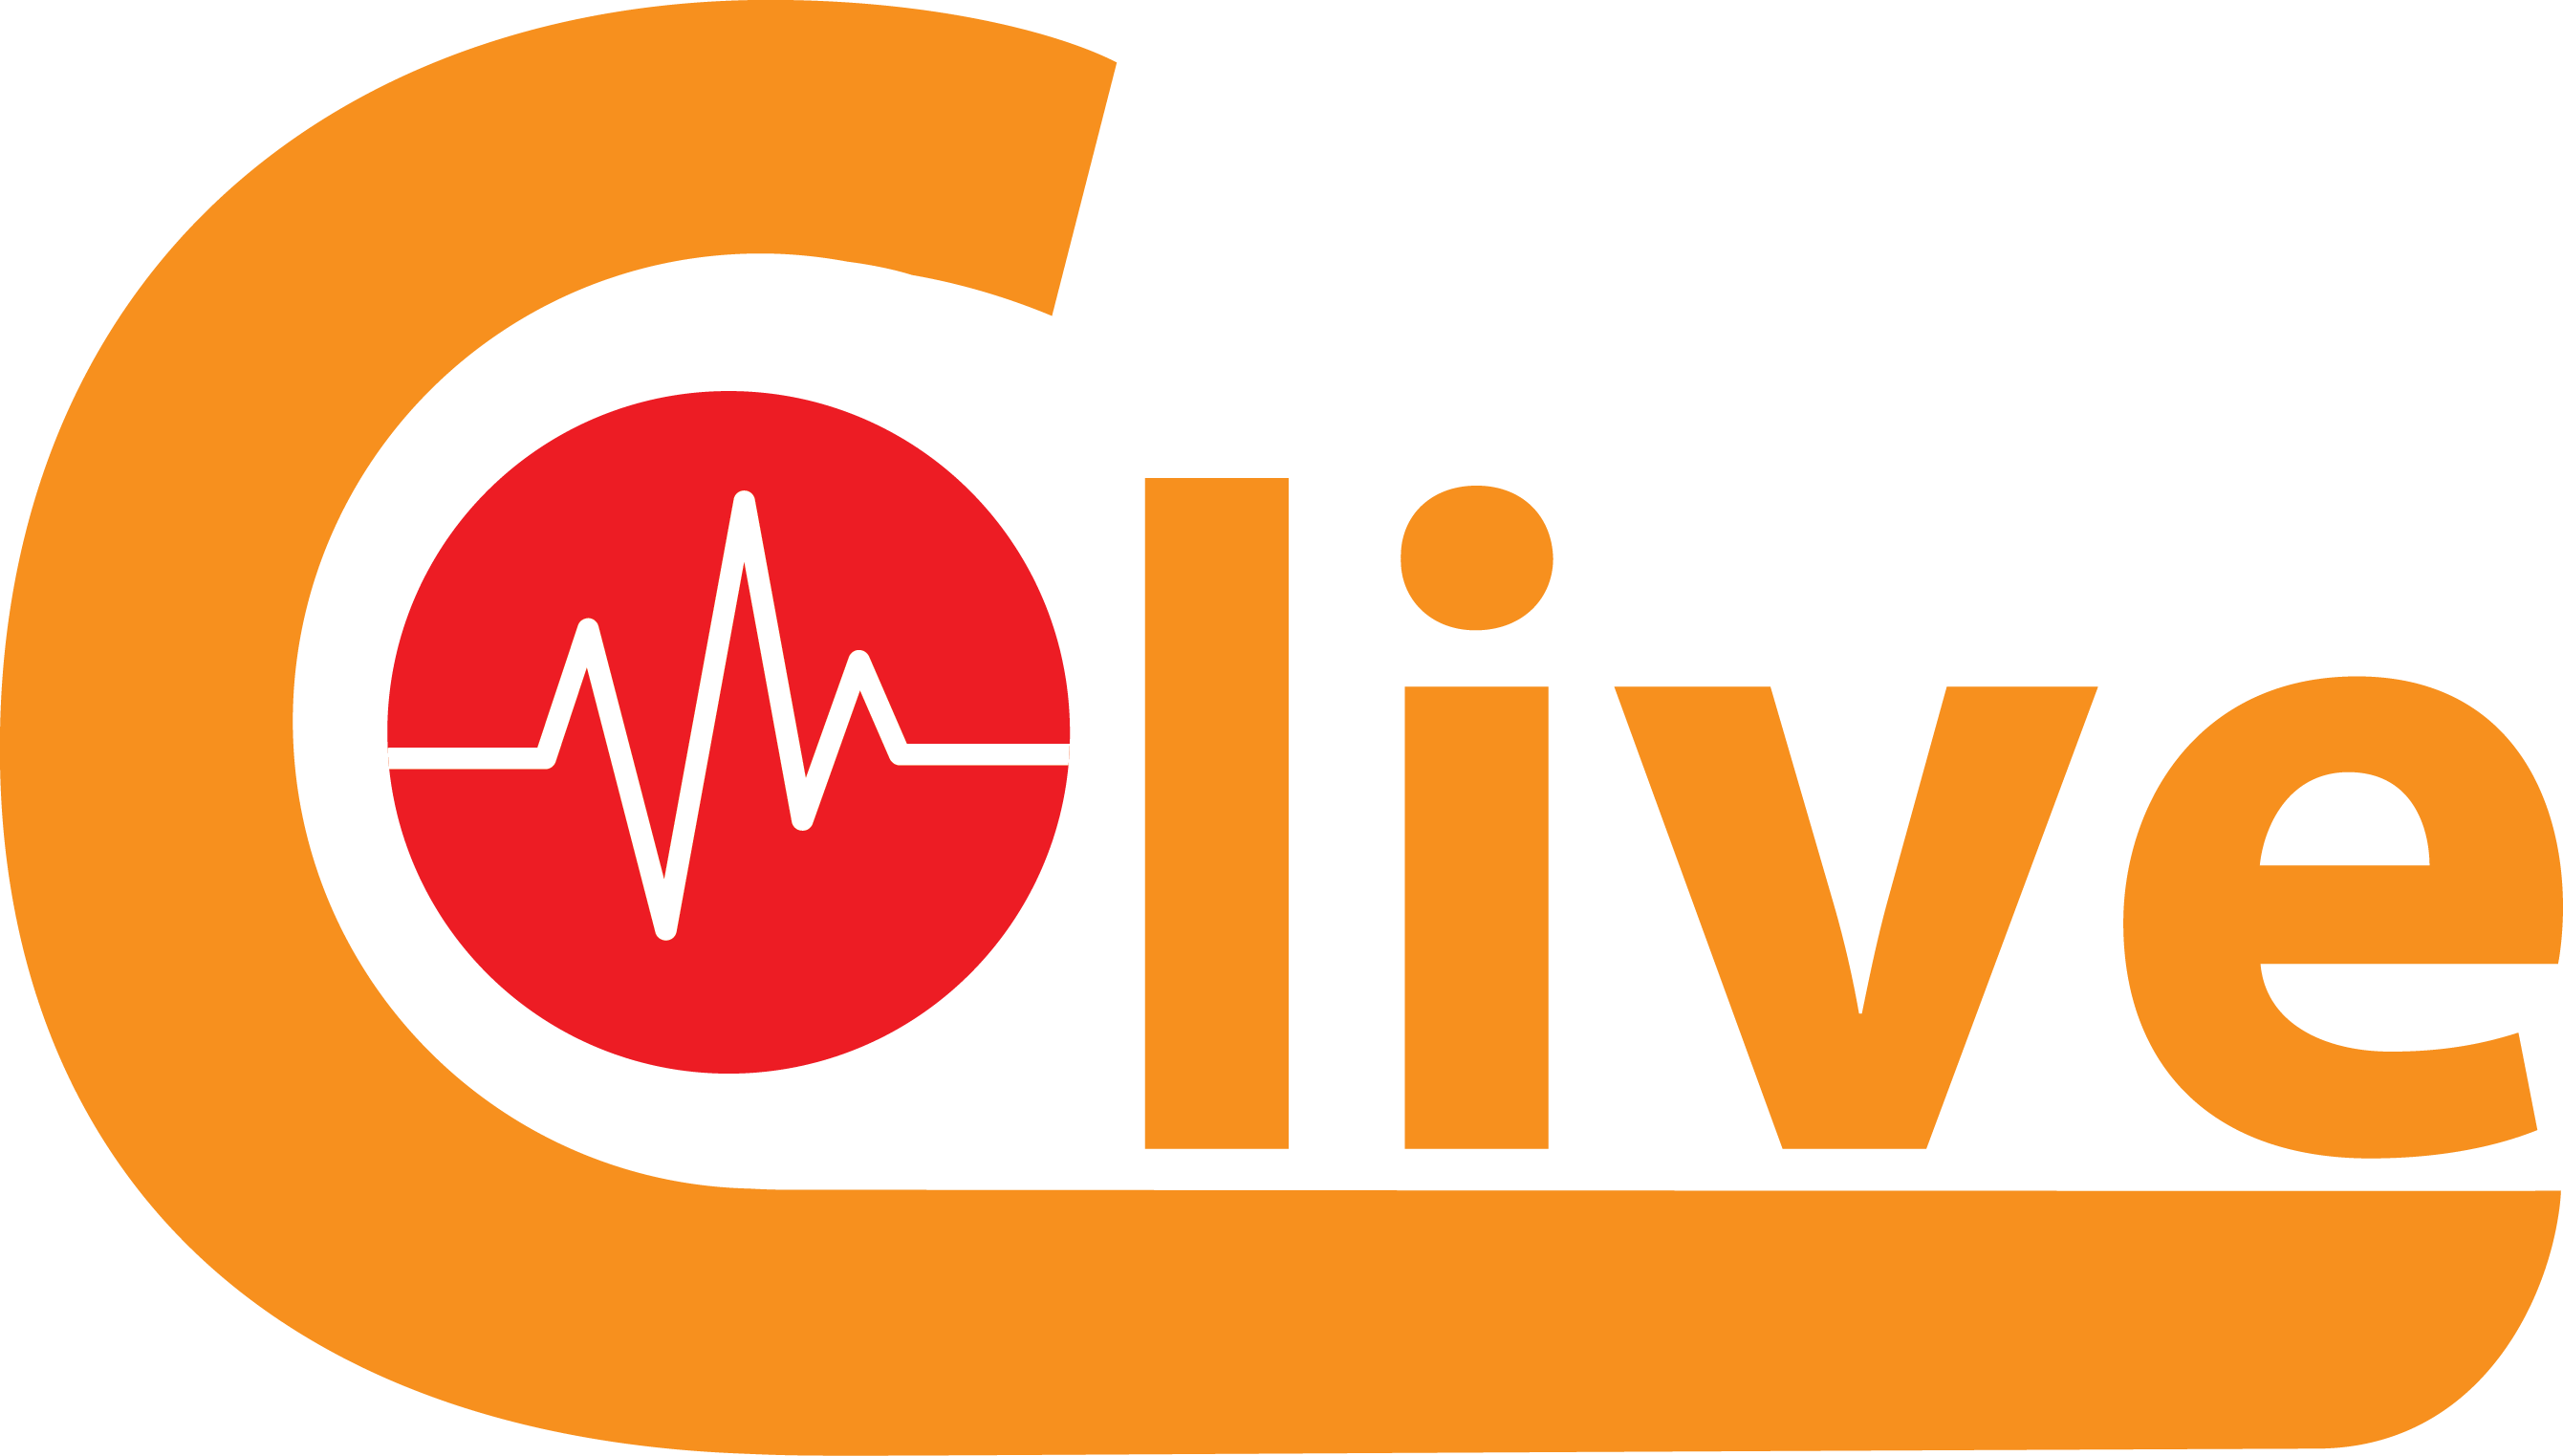 ClinicLive